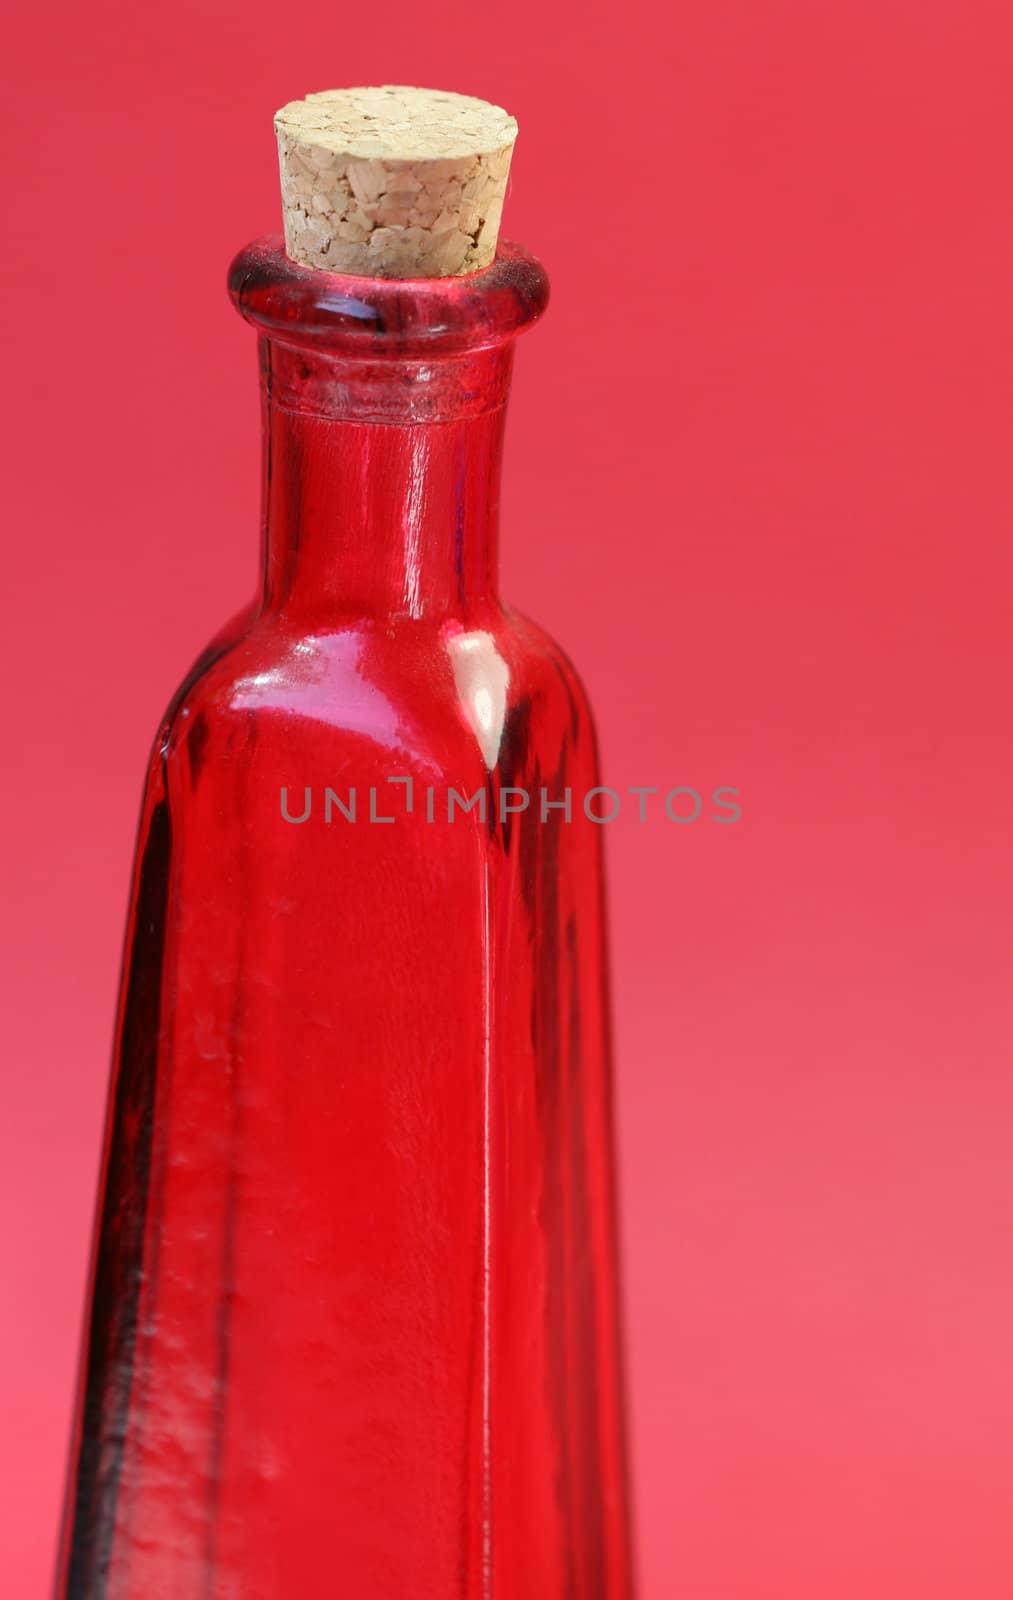 An emtpy red glass bottle with a cork in the top. Shoot against a red background